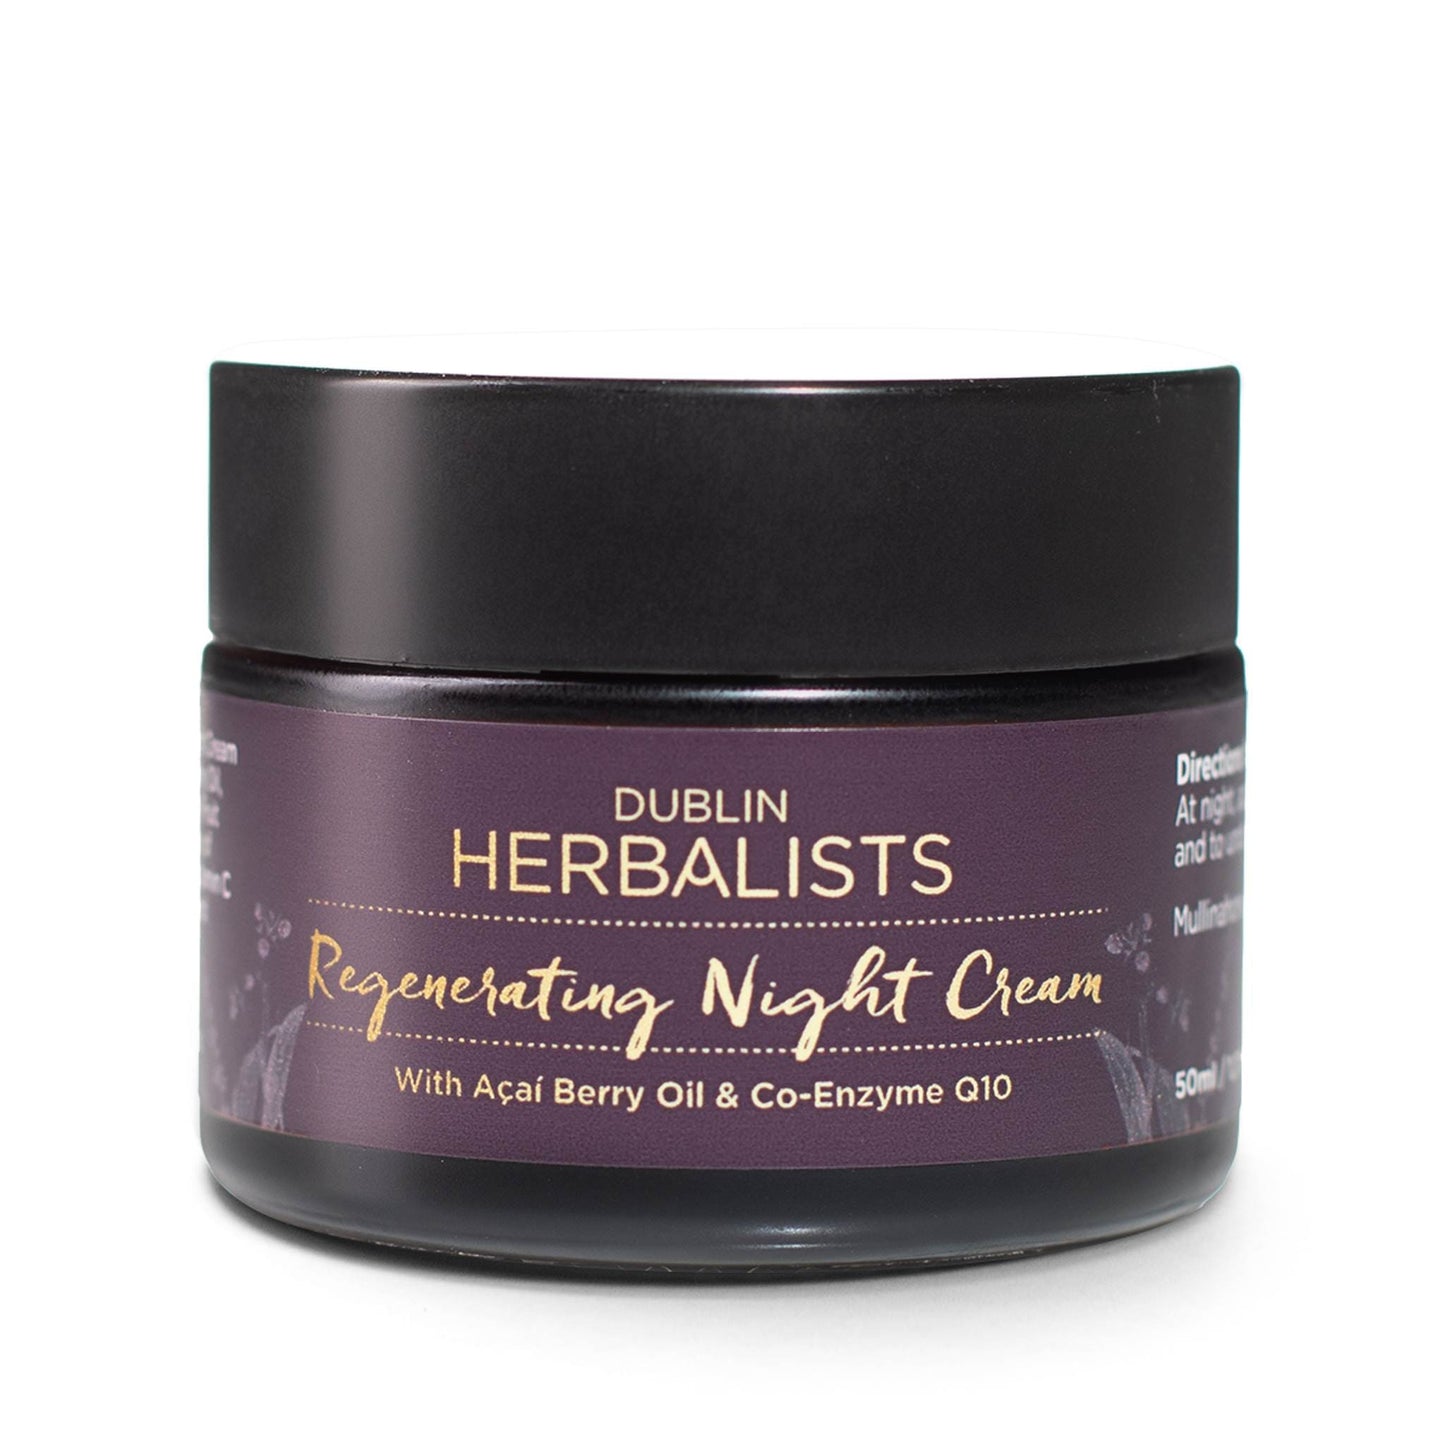 Dublin Herbalists Lotion & Moisturizer Regenerating Anti Ageing Night Cream For Over 30s - With Açai Berry Oil & Co-Enzyme Q10- 50ml -  Dublin Herbalists